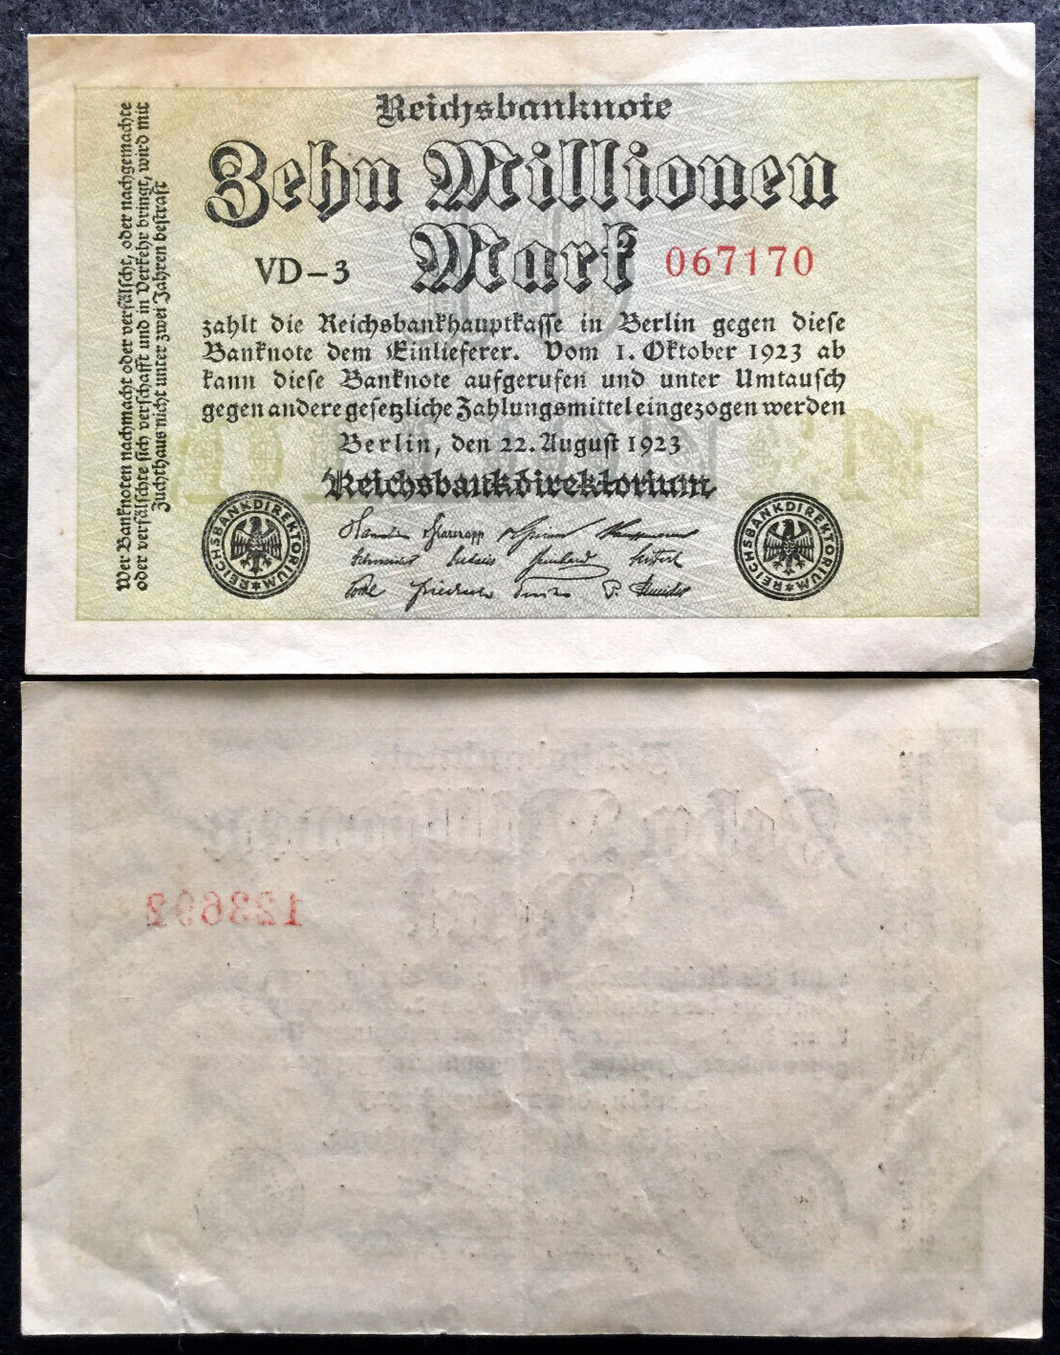 Germany 10 MILLION Mark 1923 Banknote - 99 Years Old